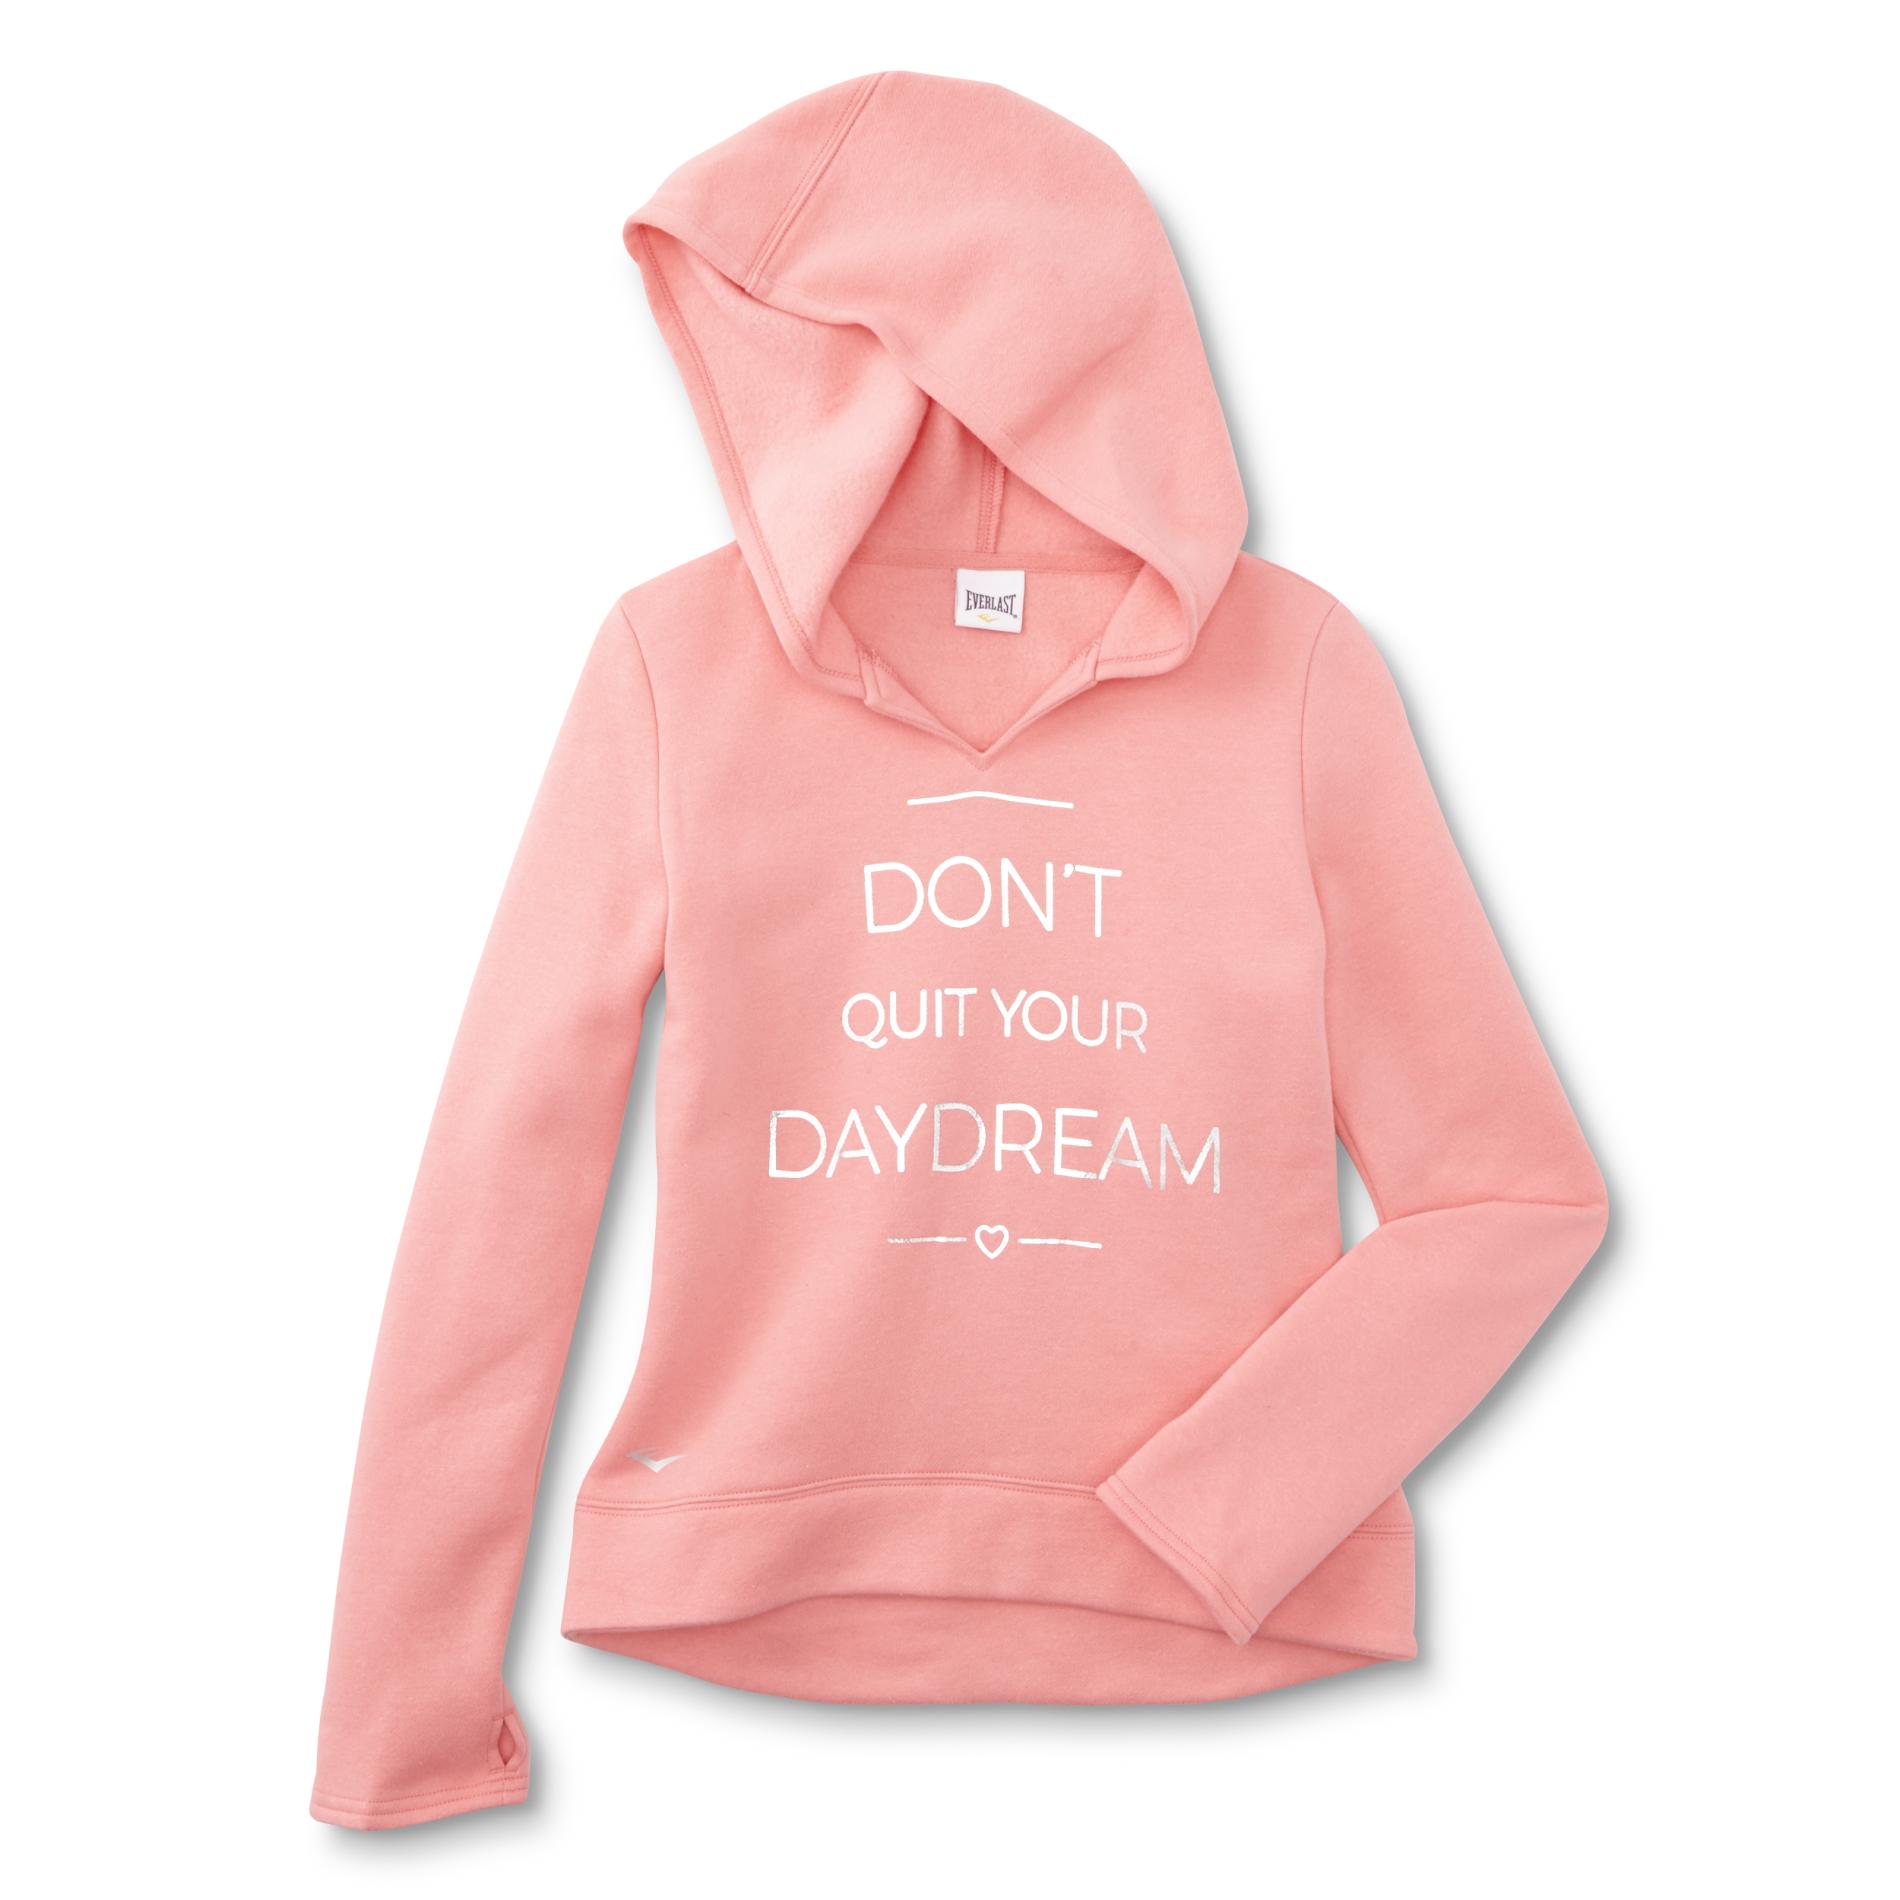 Everlast&reg; Girl's Graphic Hoodie - Don't Quit Your Daydream